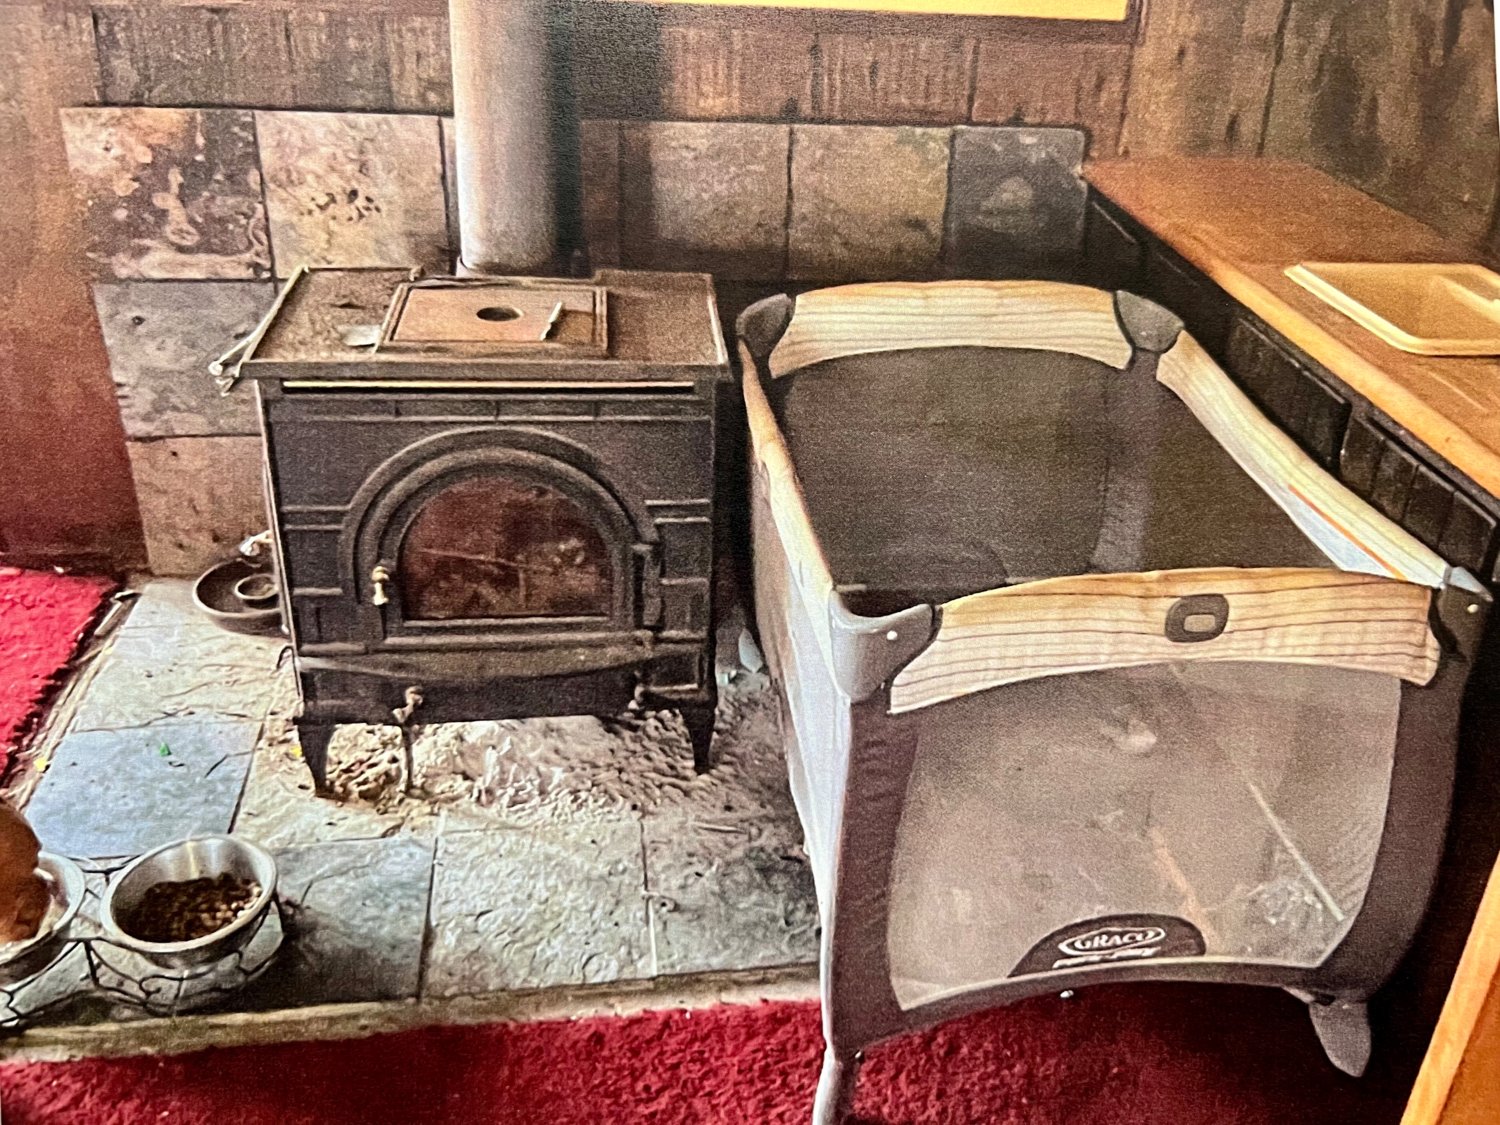 A child’s pack ’n play sits directly beside a wood-burning stove inside the house at 36 Kinnicutt Ave. An inspection of the house’s interior last week led to its condemnation on Monday morning.